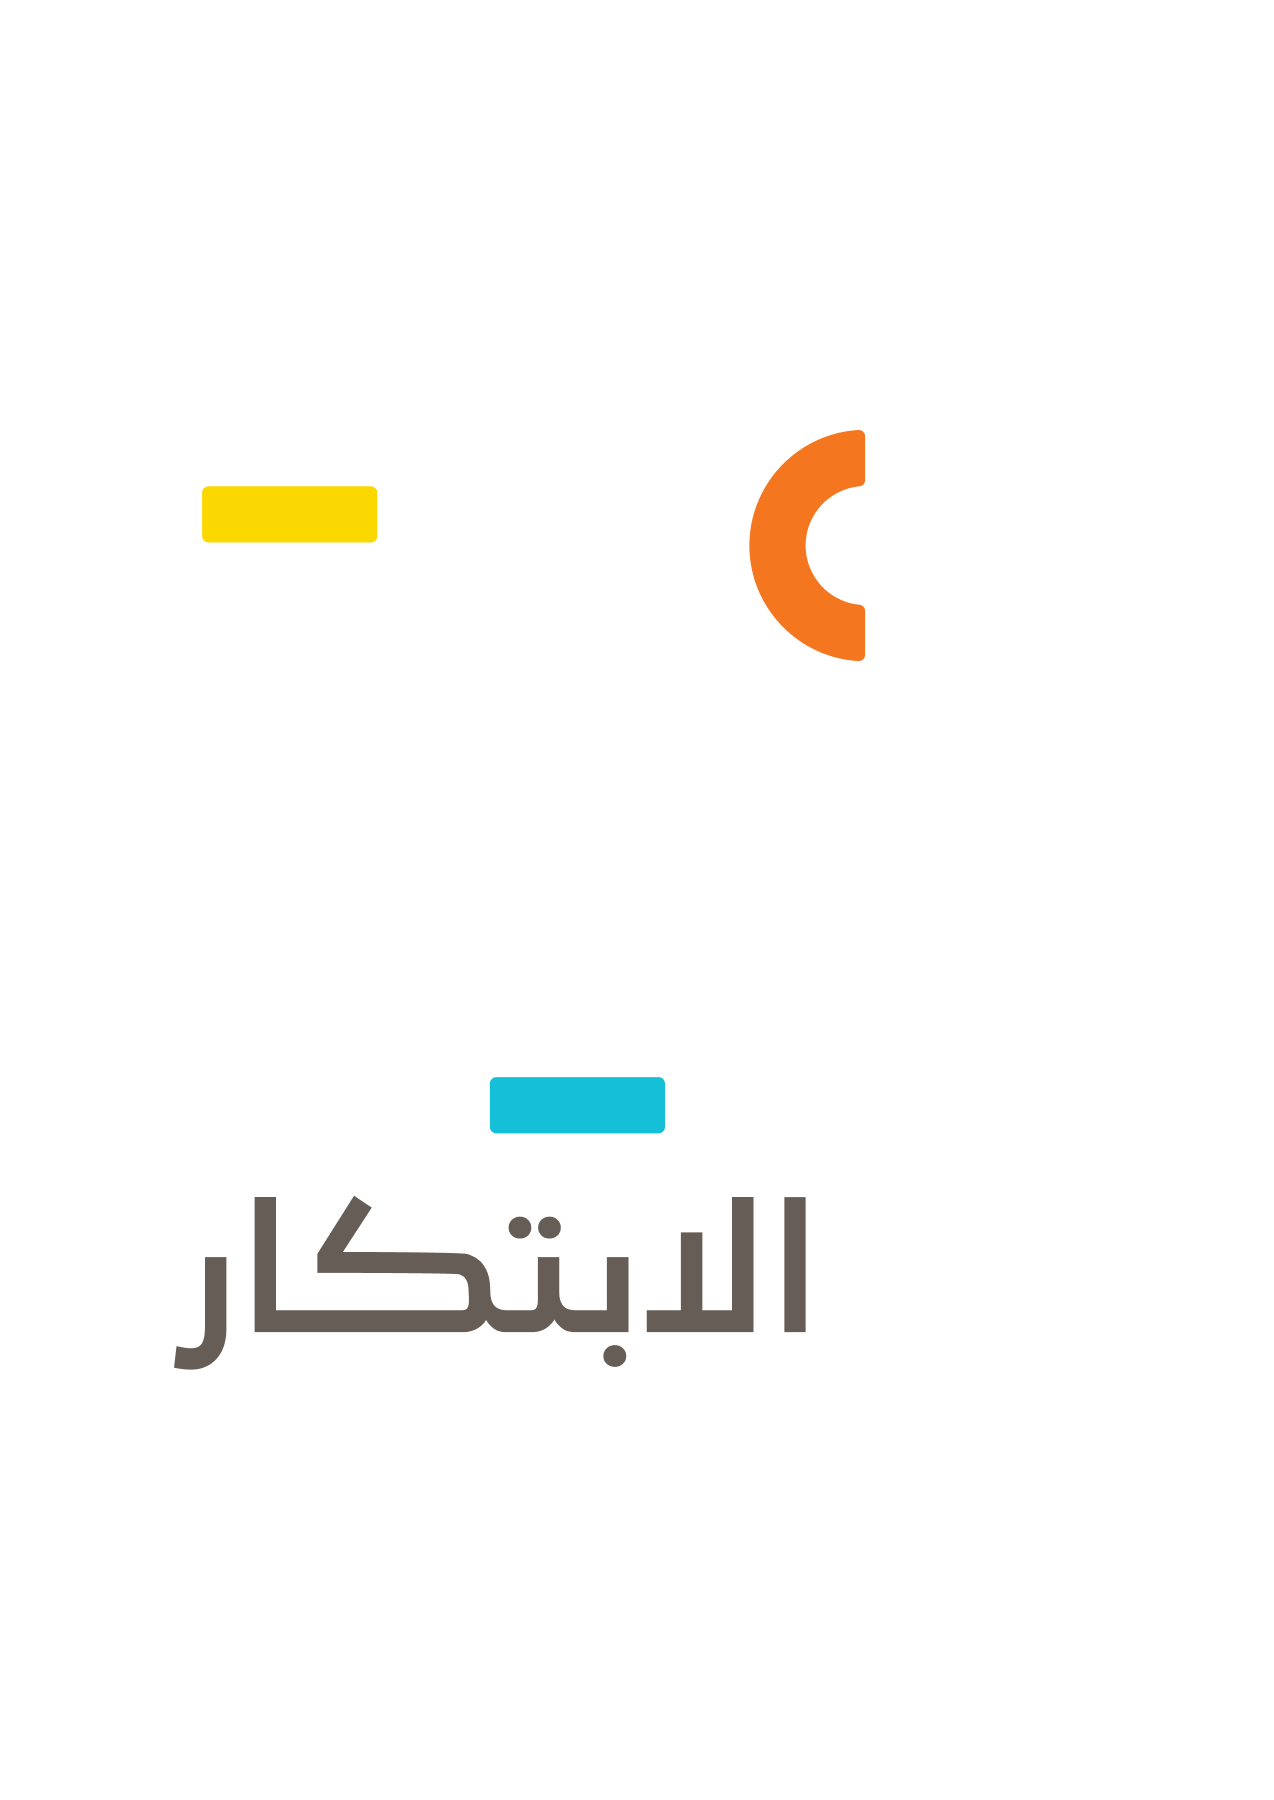 A colorful logo with arabic writing on a white background.